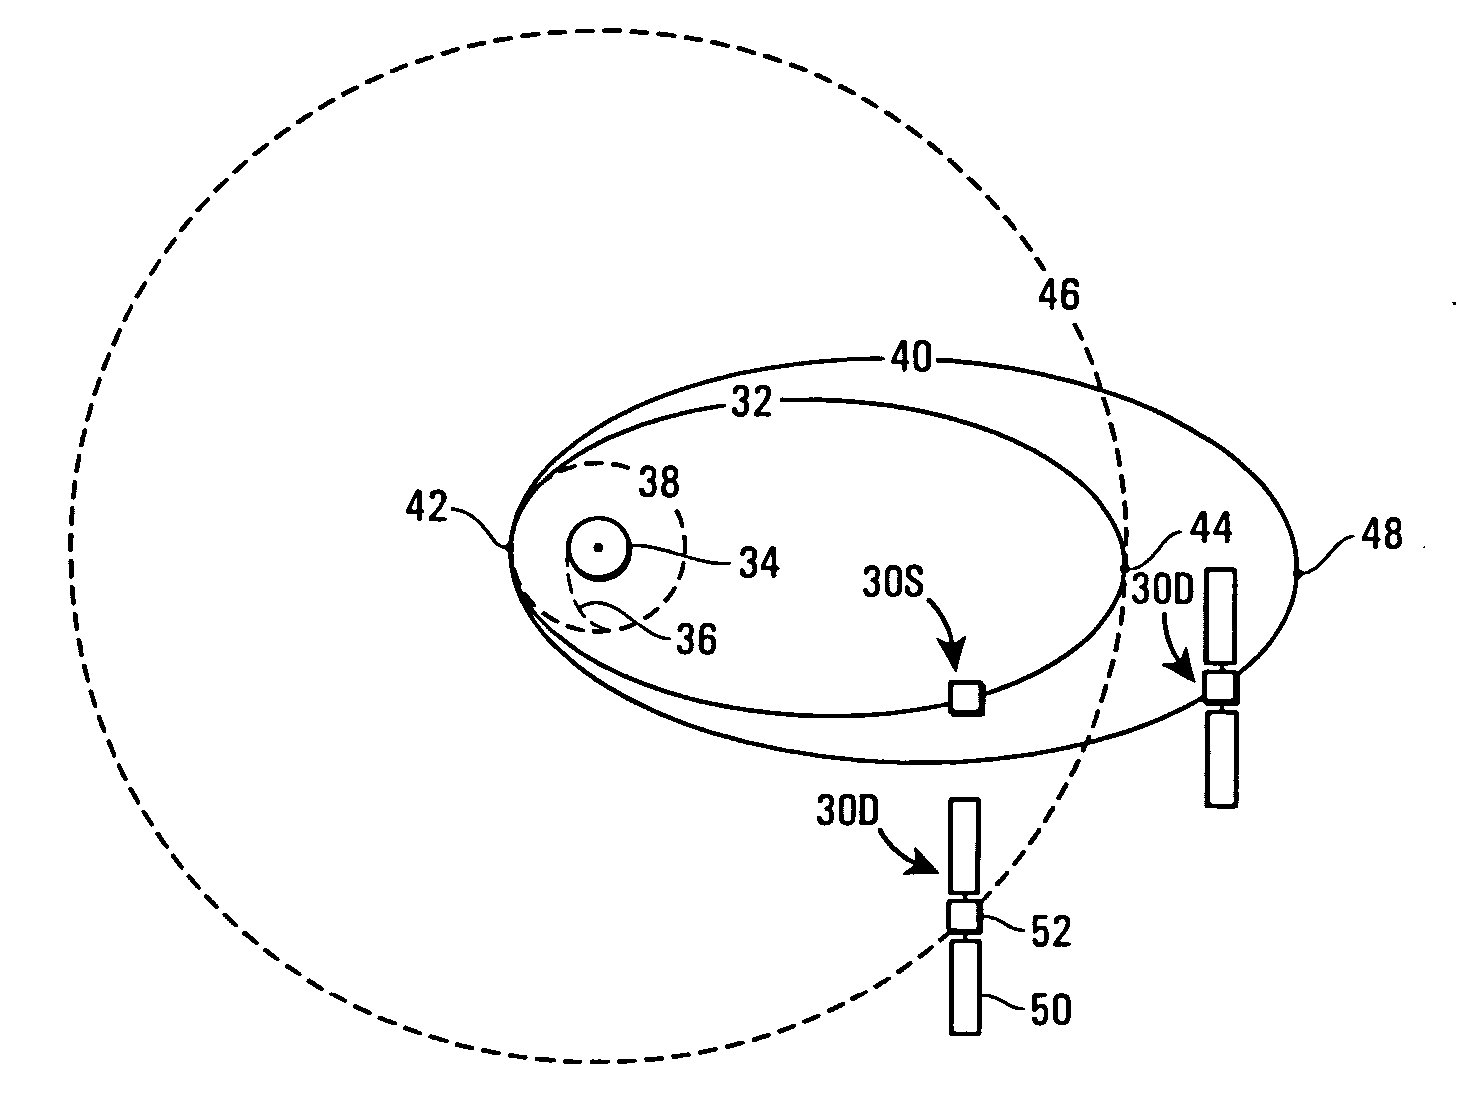 Spacecraft power acquisition method for wing-stowed configuration